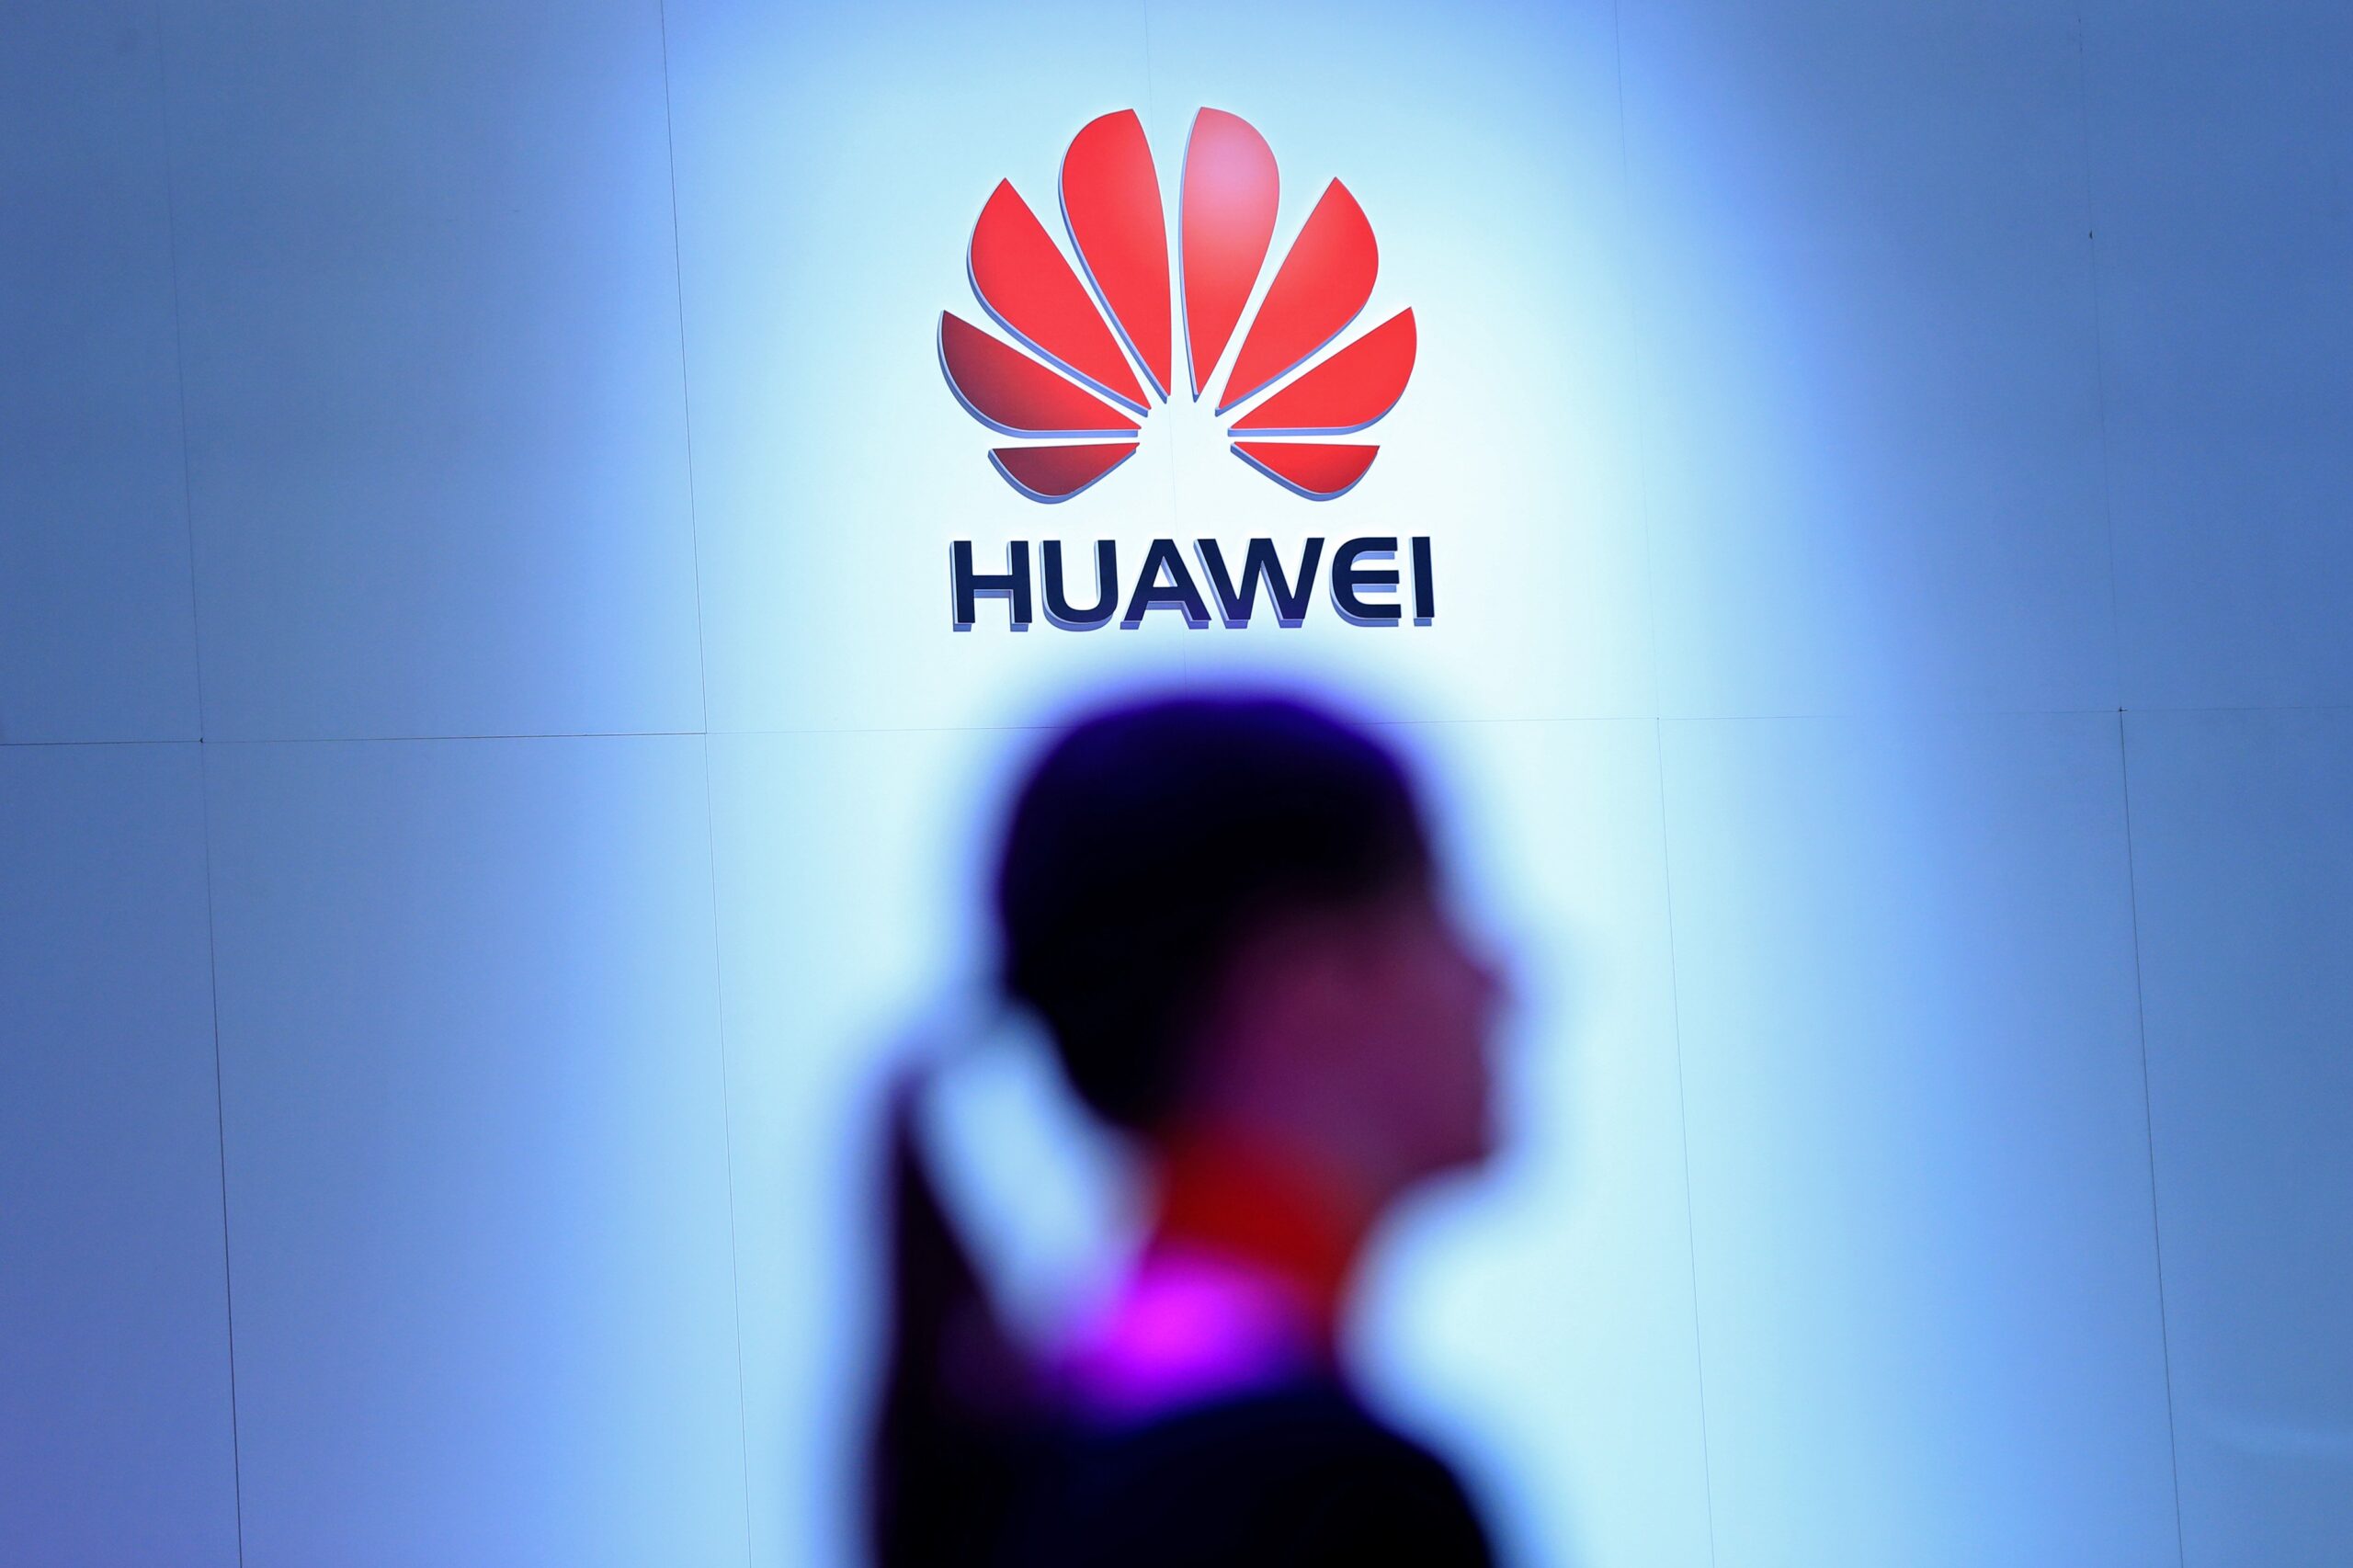 US reinforces restrictions on Huawei’s access to chips and other tech